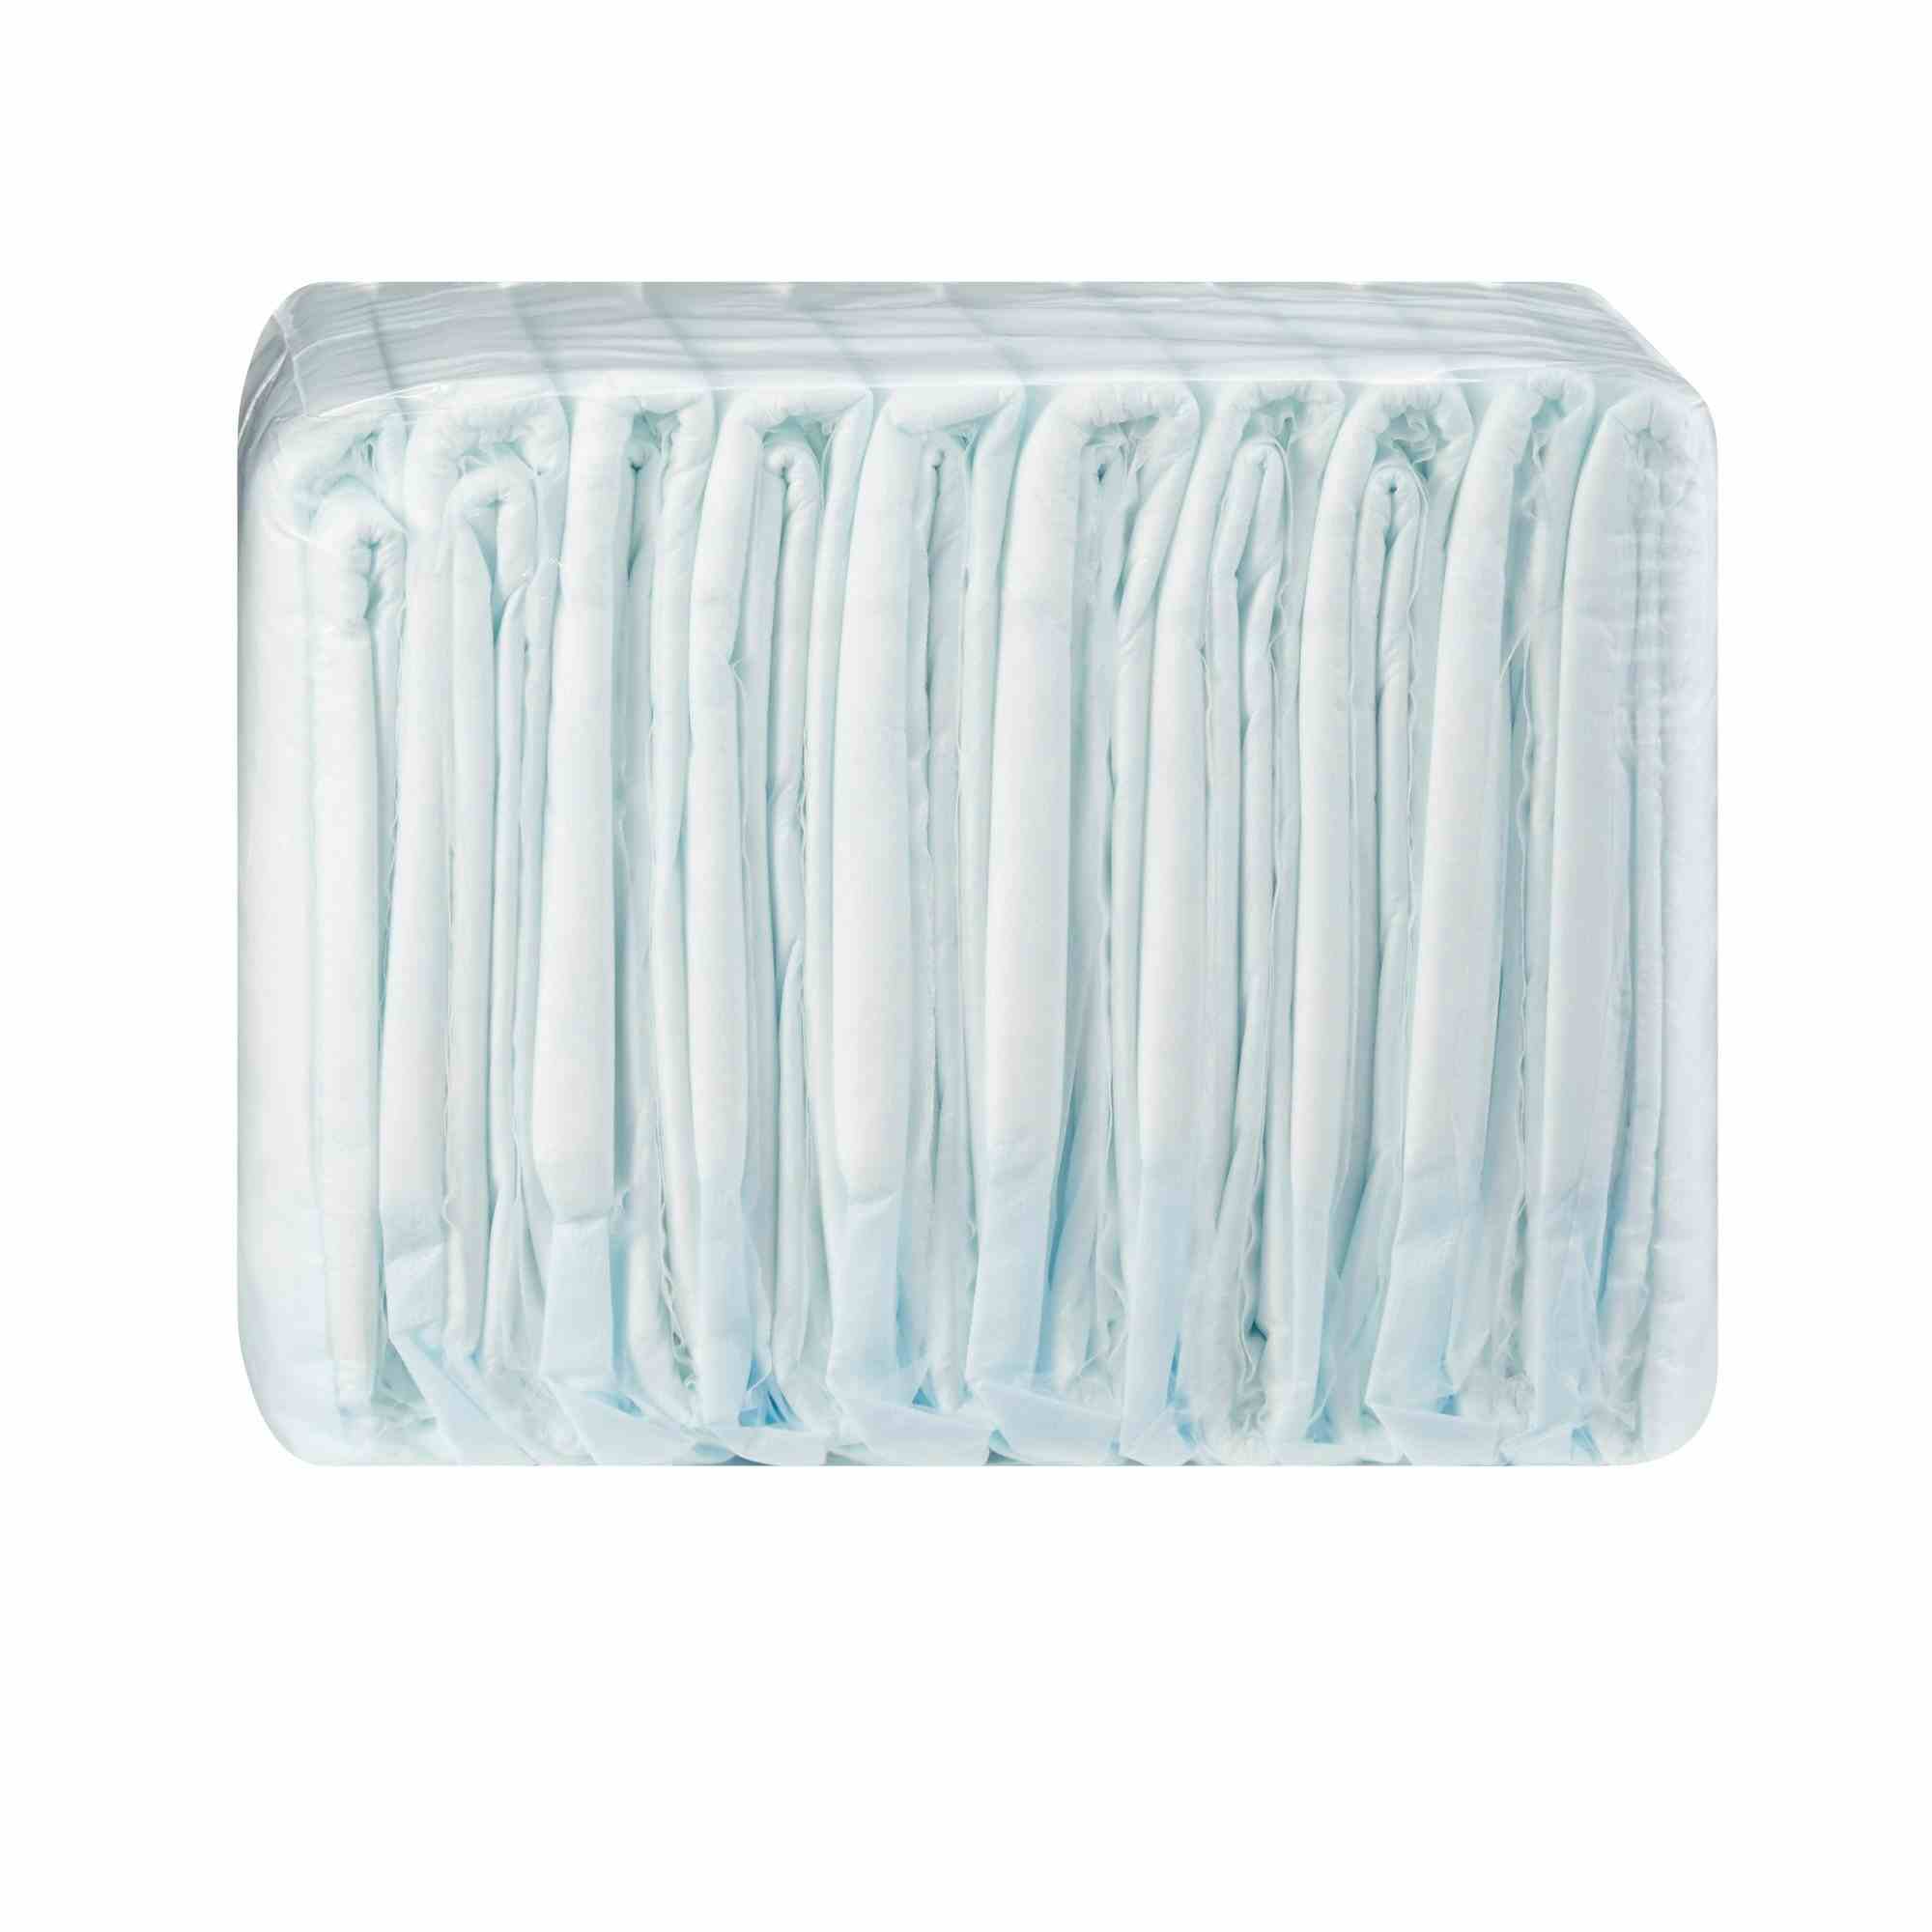 Wings Breathable Plus Low Air Loss Disposable Underpad, Heavy Absorbency, 984, 30 X 36" - Case of 60 Pads (6 Bags)